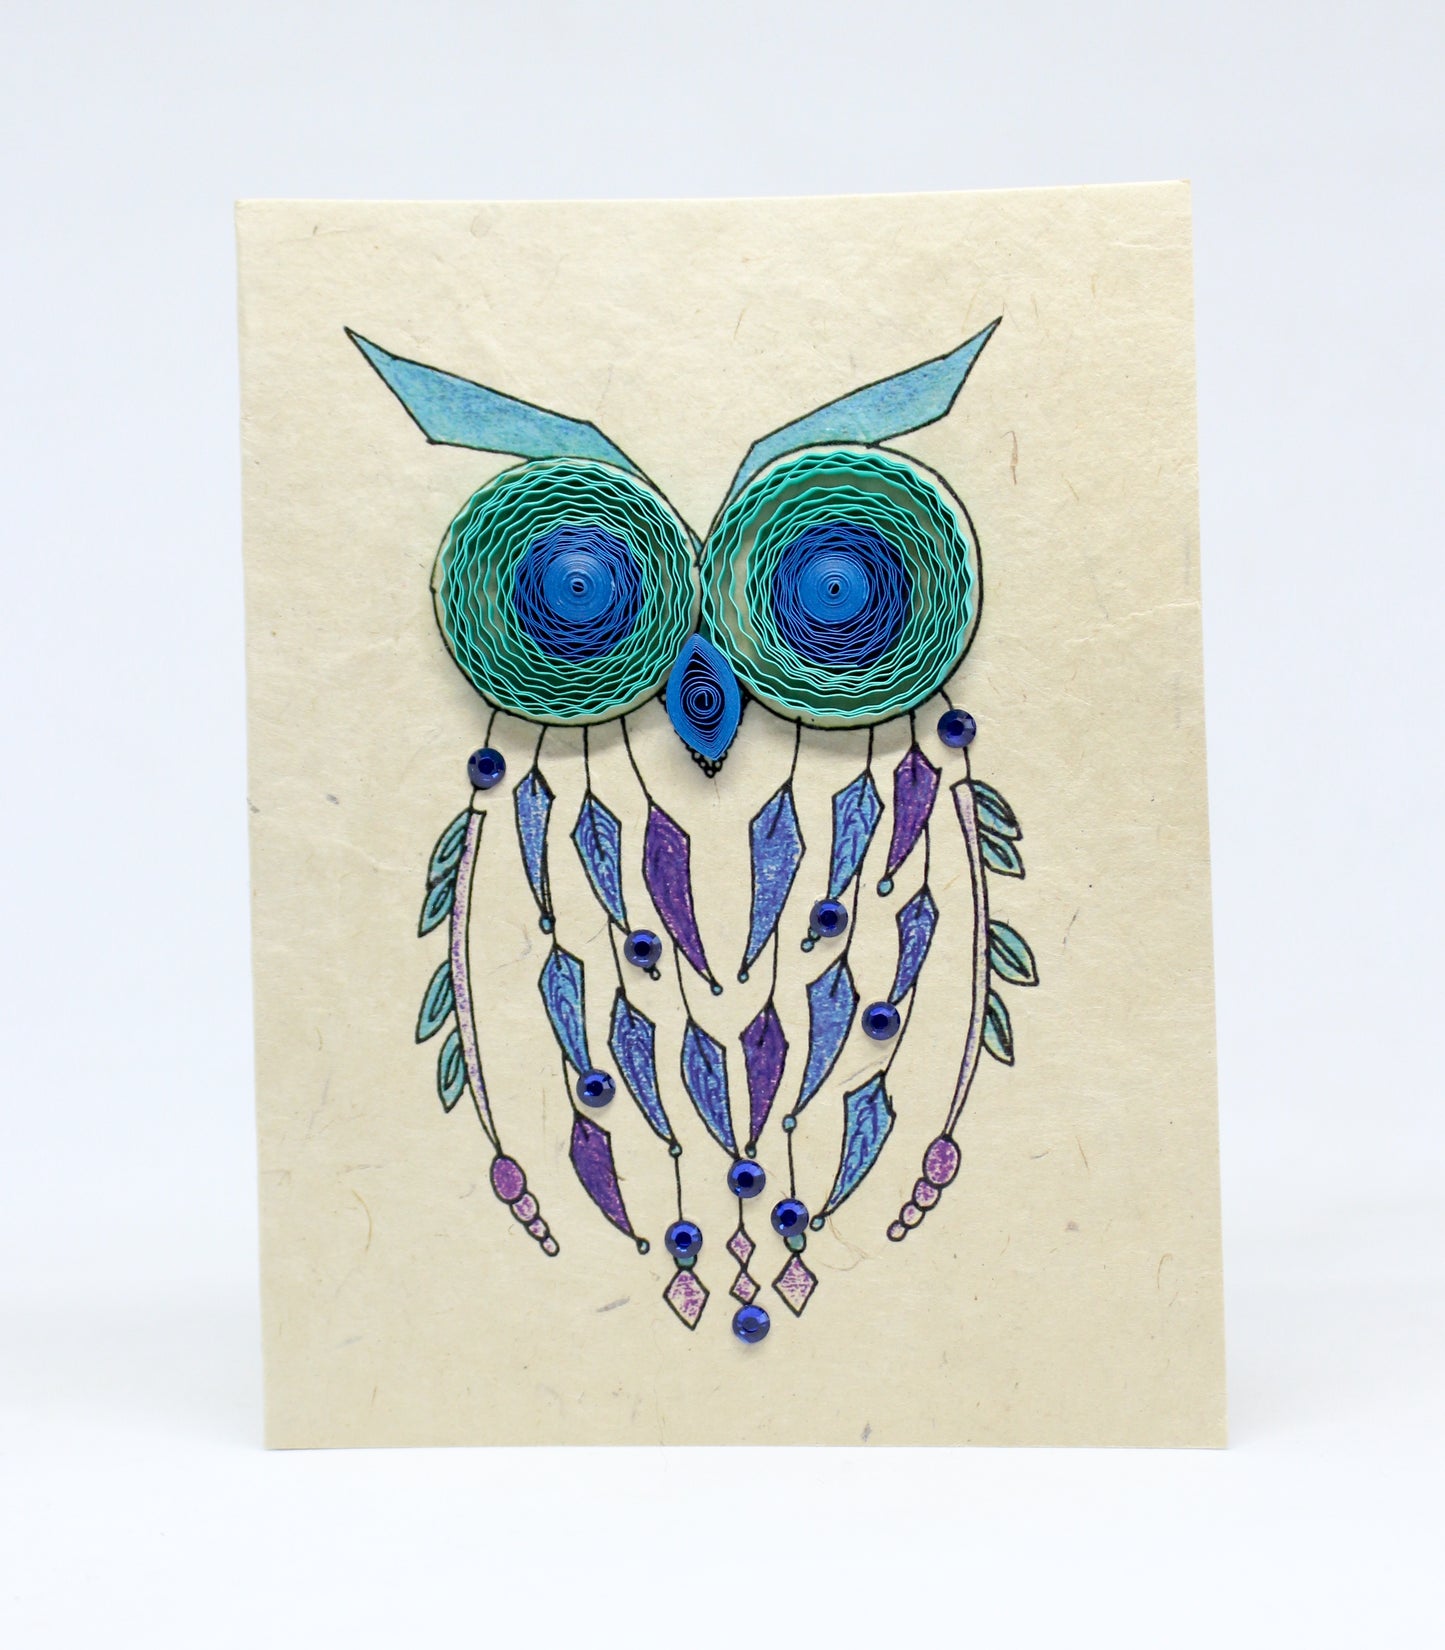 Quilled Owl Greeting Card